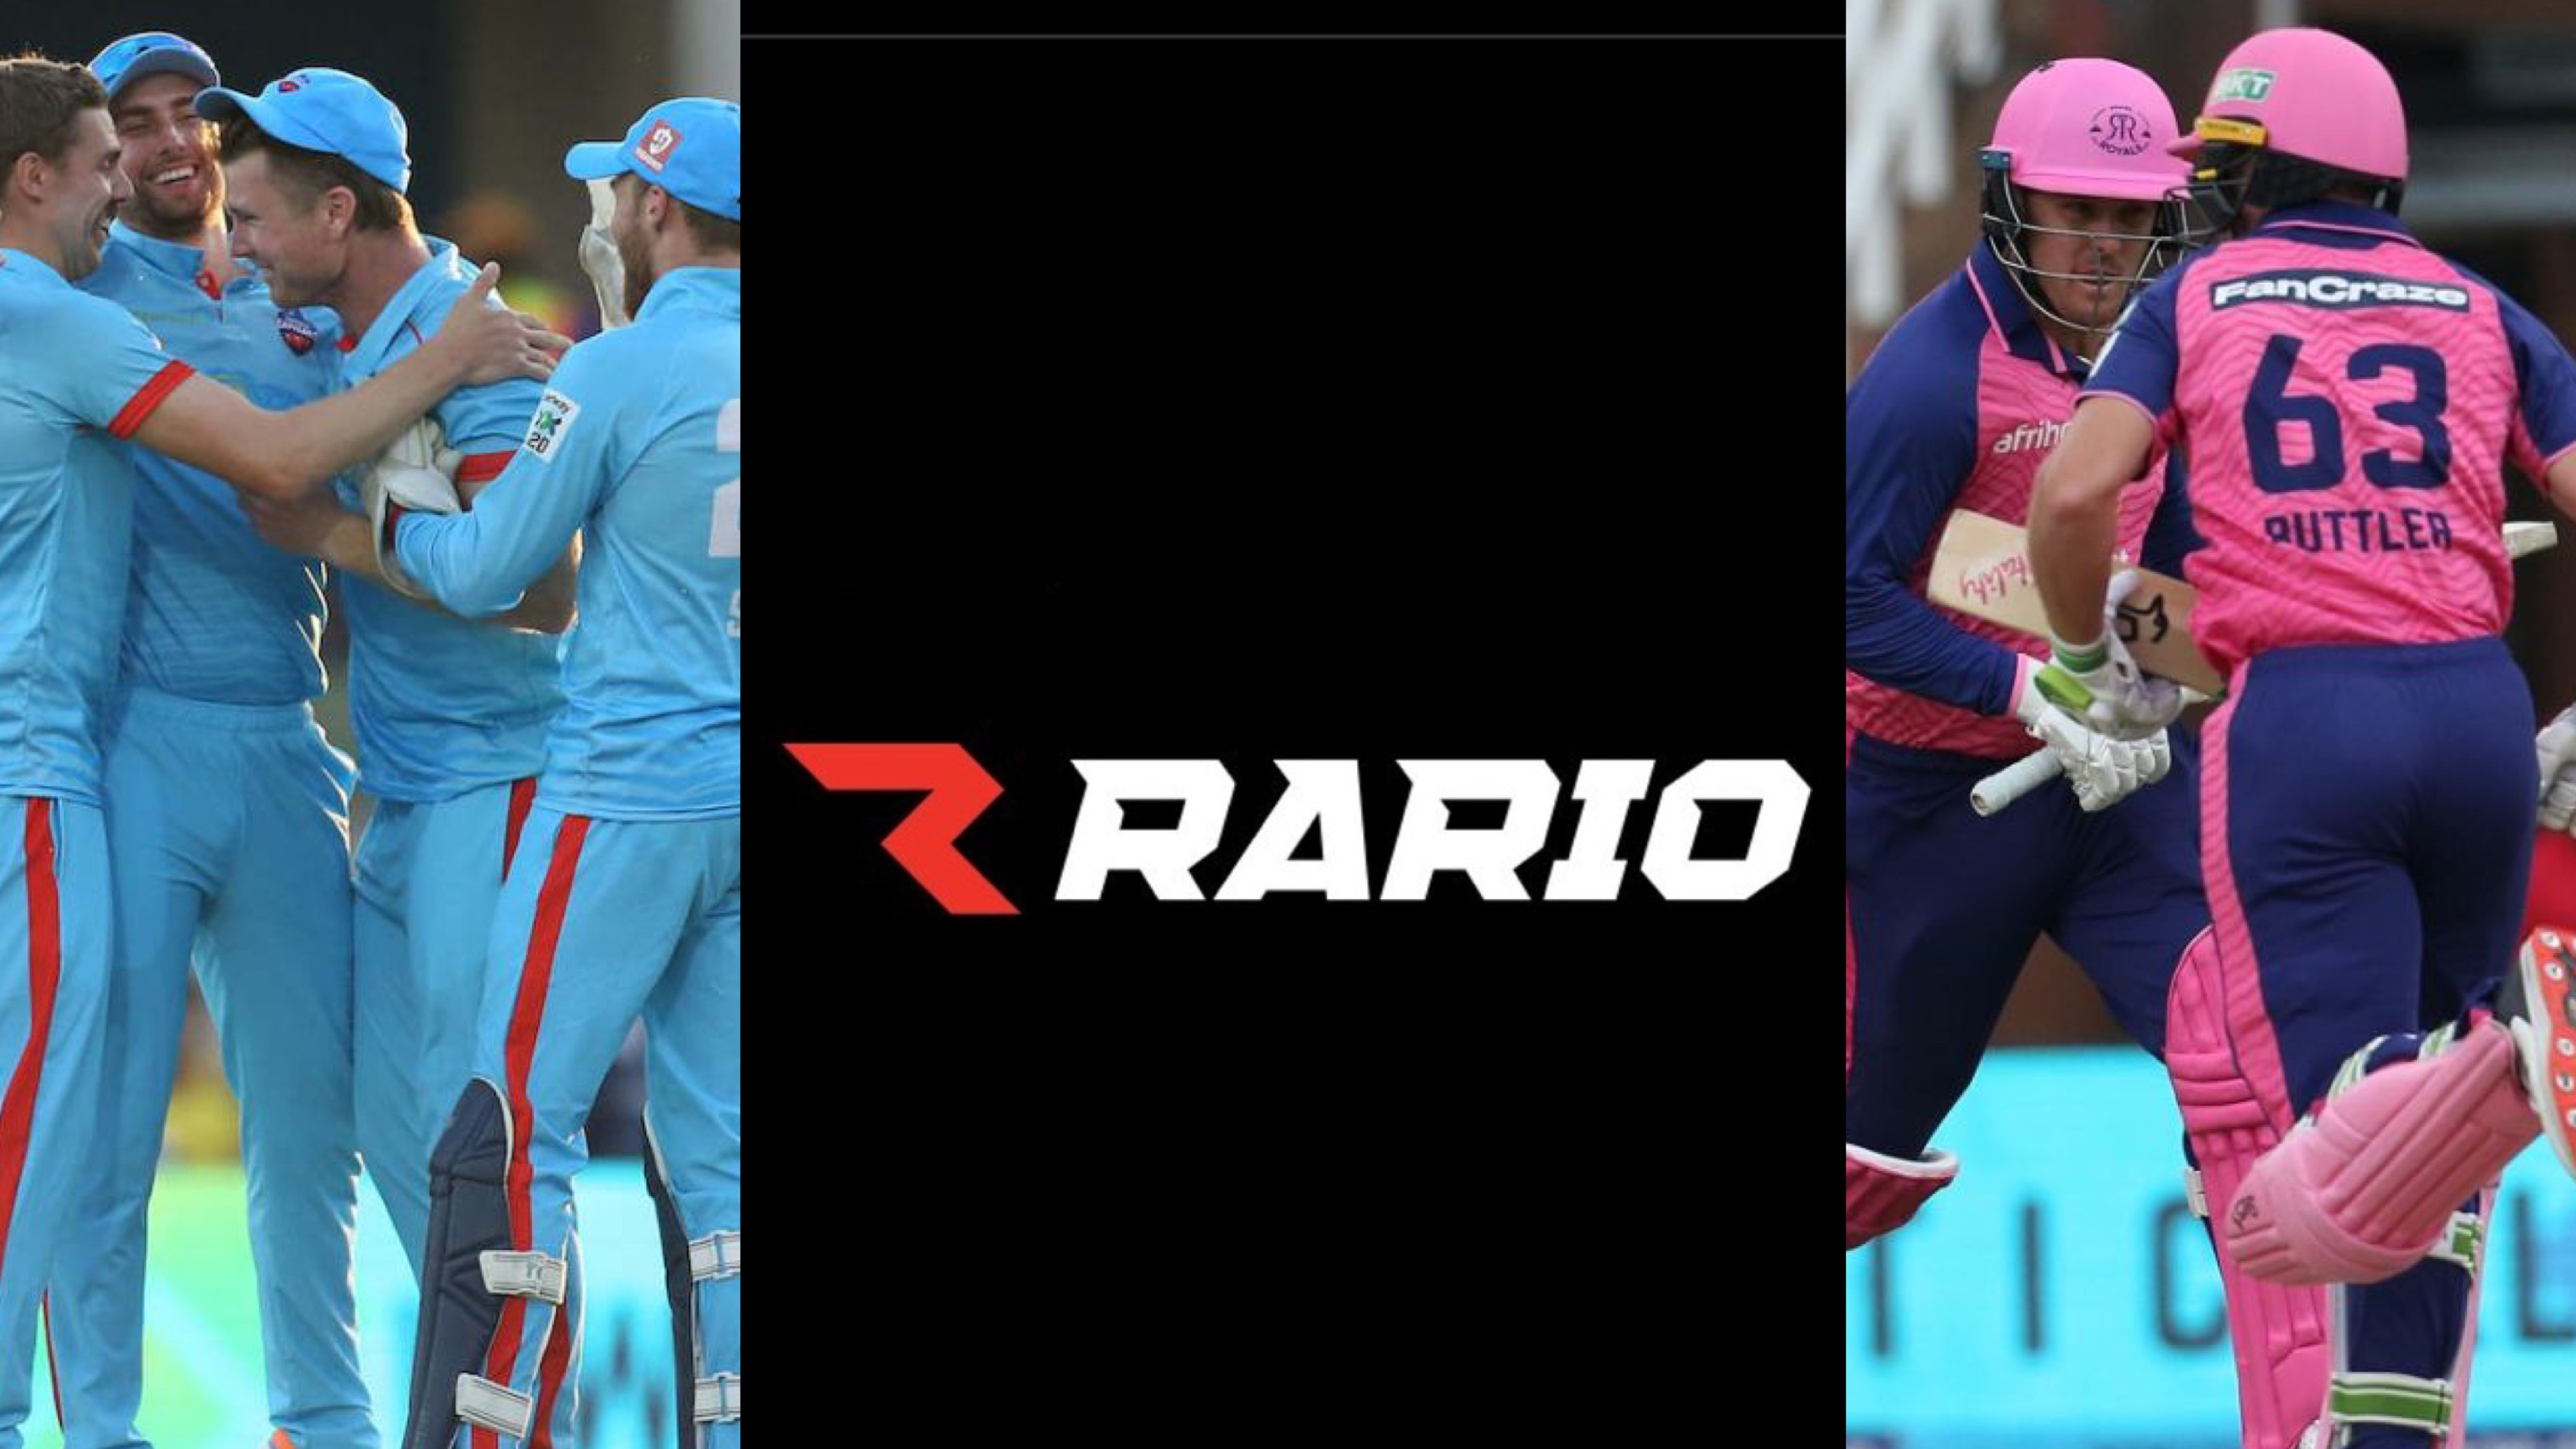 Rario D3 Predictions: Grab exciting player cards for RSA T20 League and play for great prizes